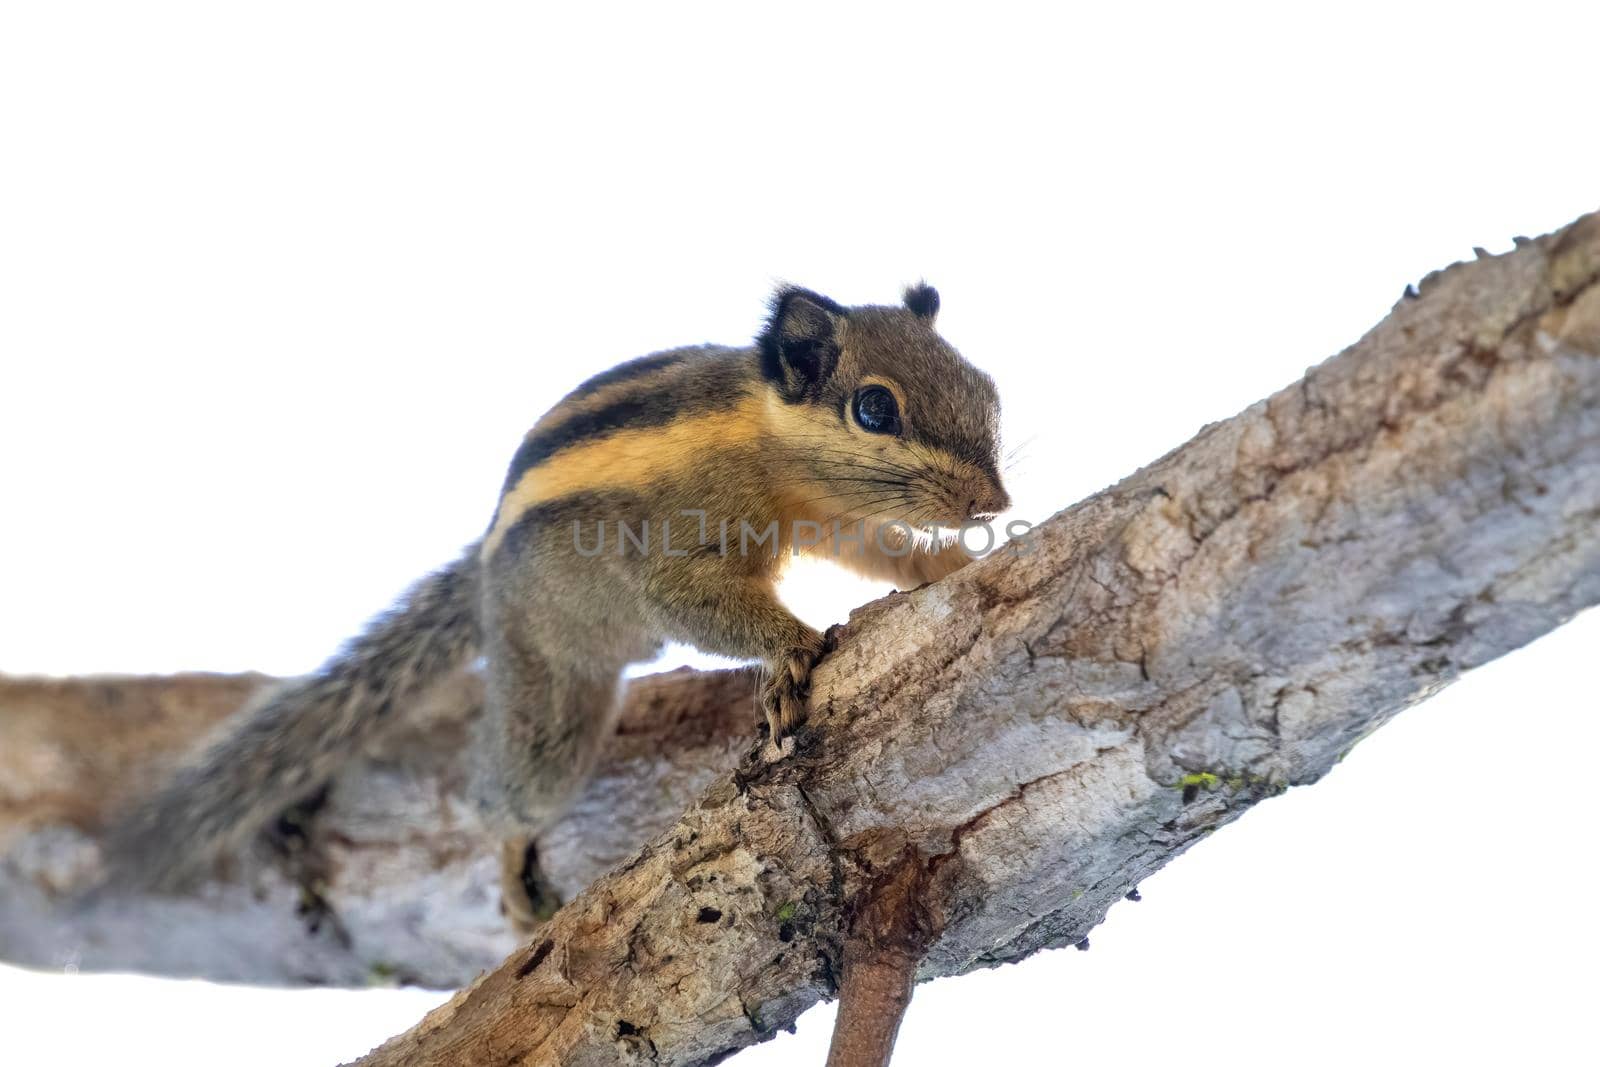 Imags of himalayan striped squirrel or burmese striped squirrel(Tamiops mcclellandii)on a tree. Wild Animals. by yod67